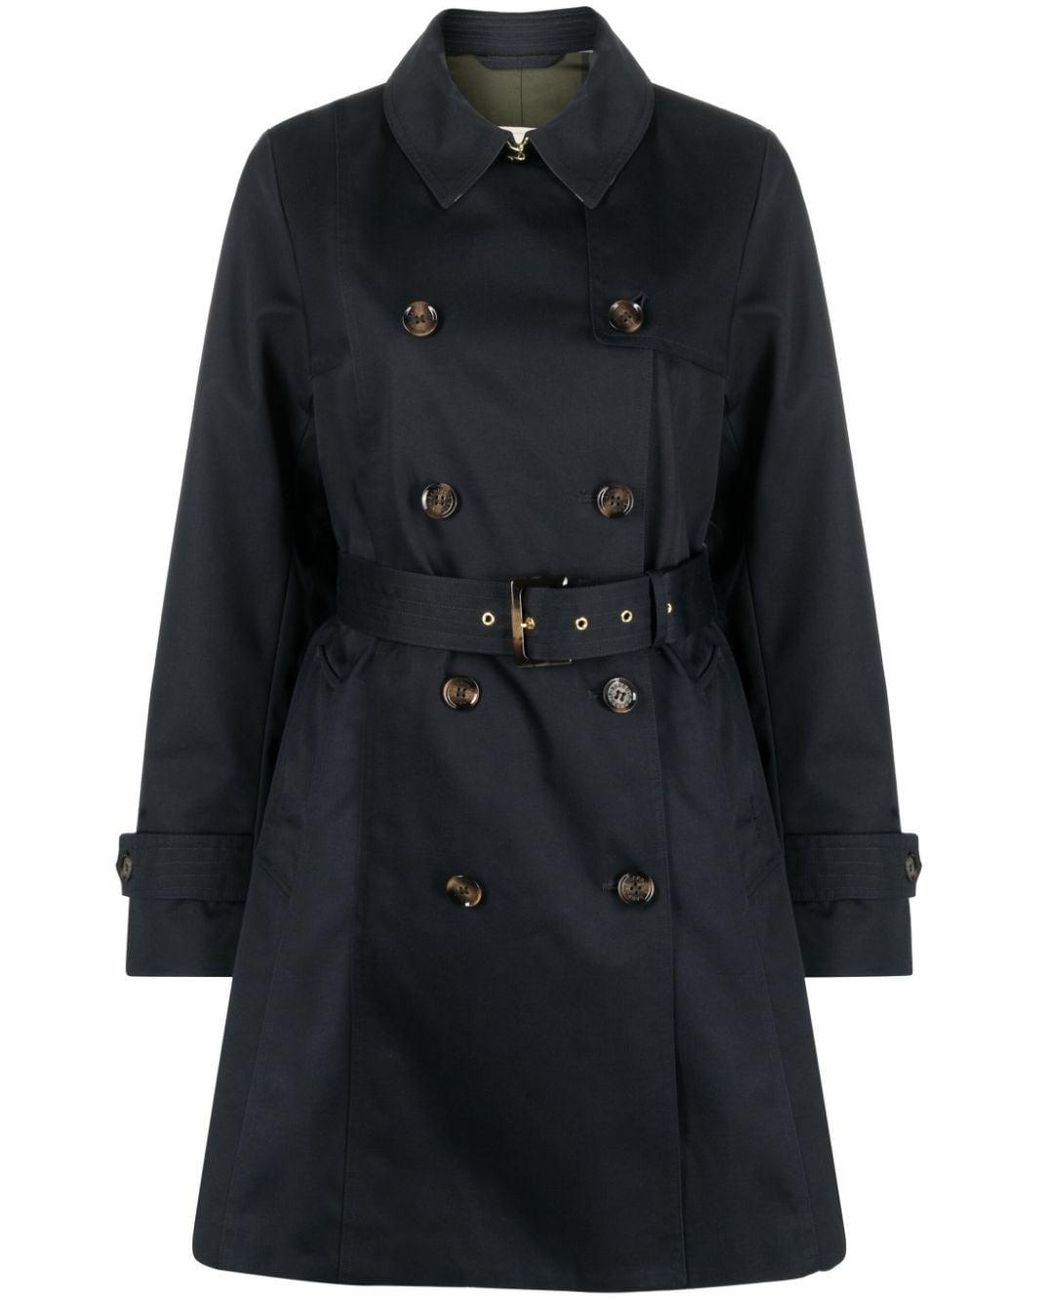 Barbour Greta Short Belted Trench Coat in Black | Lyst Canada